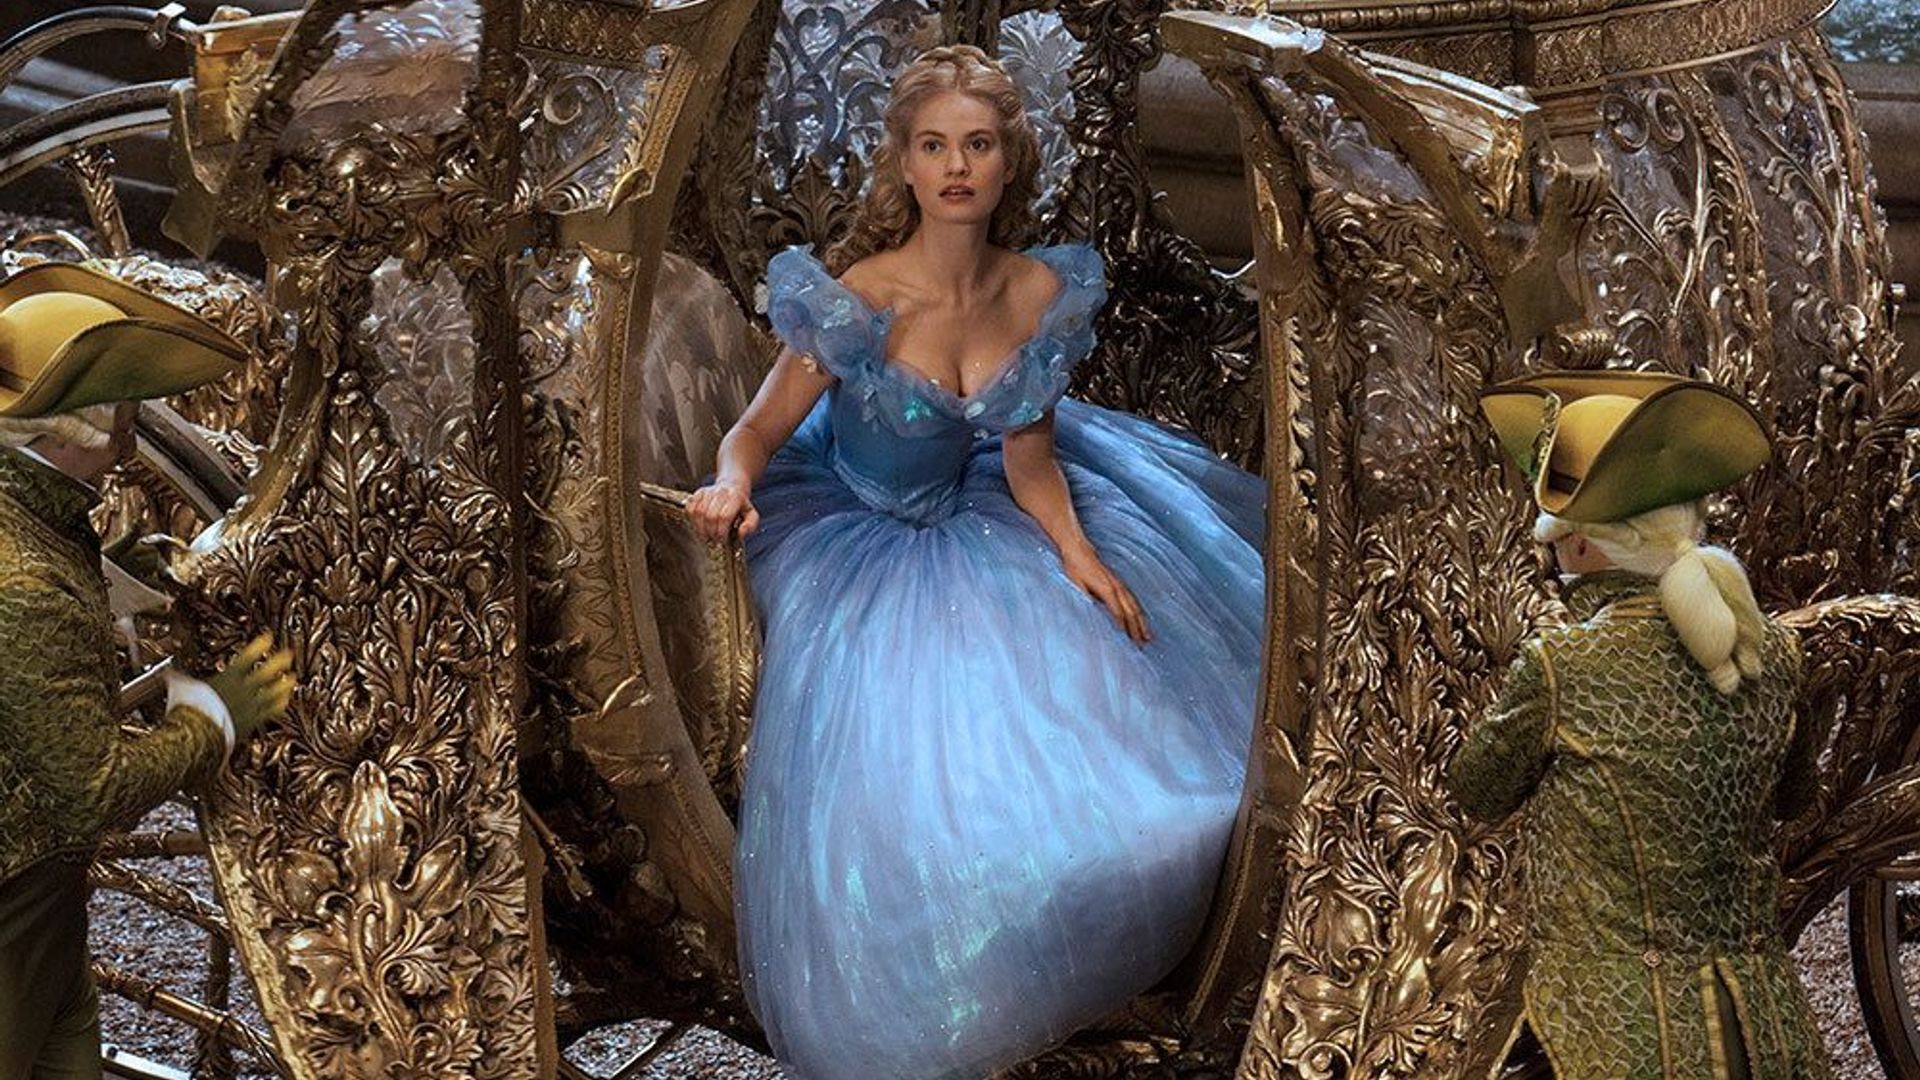 Lily James steps out of pumpkin carriage as Cinderella in the 2015 film